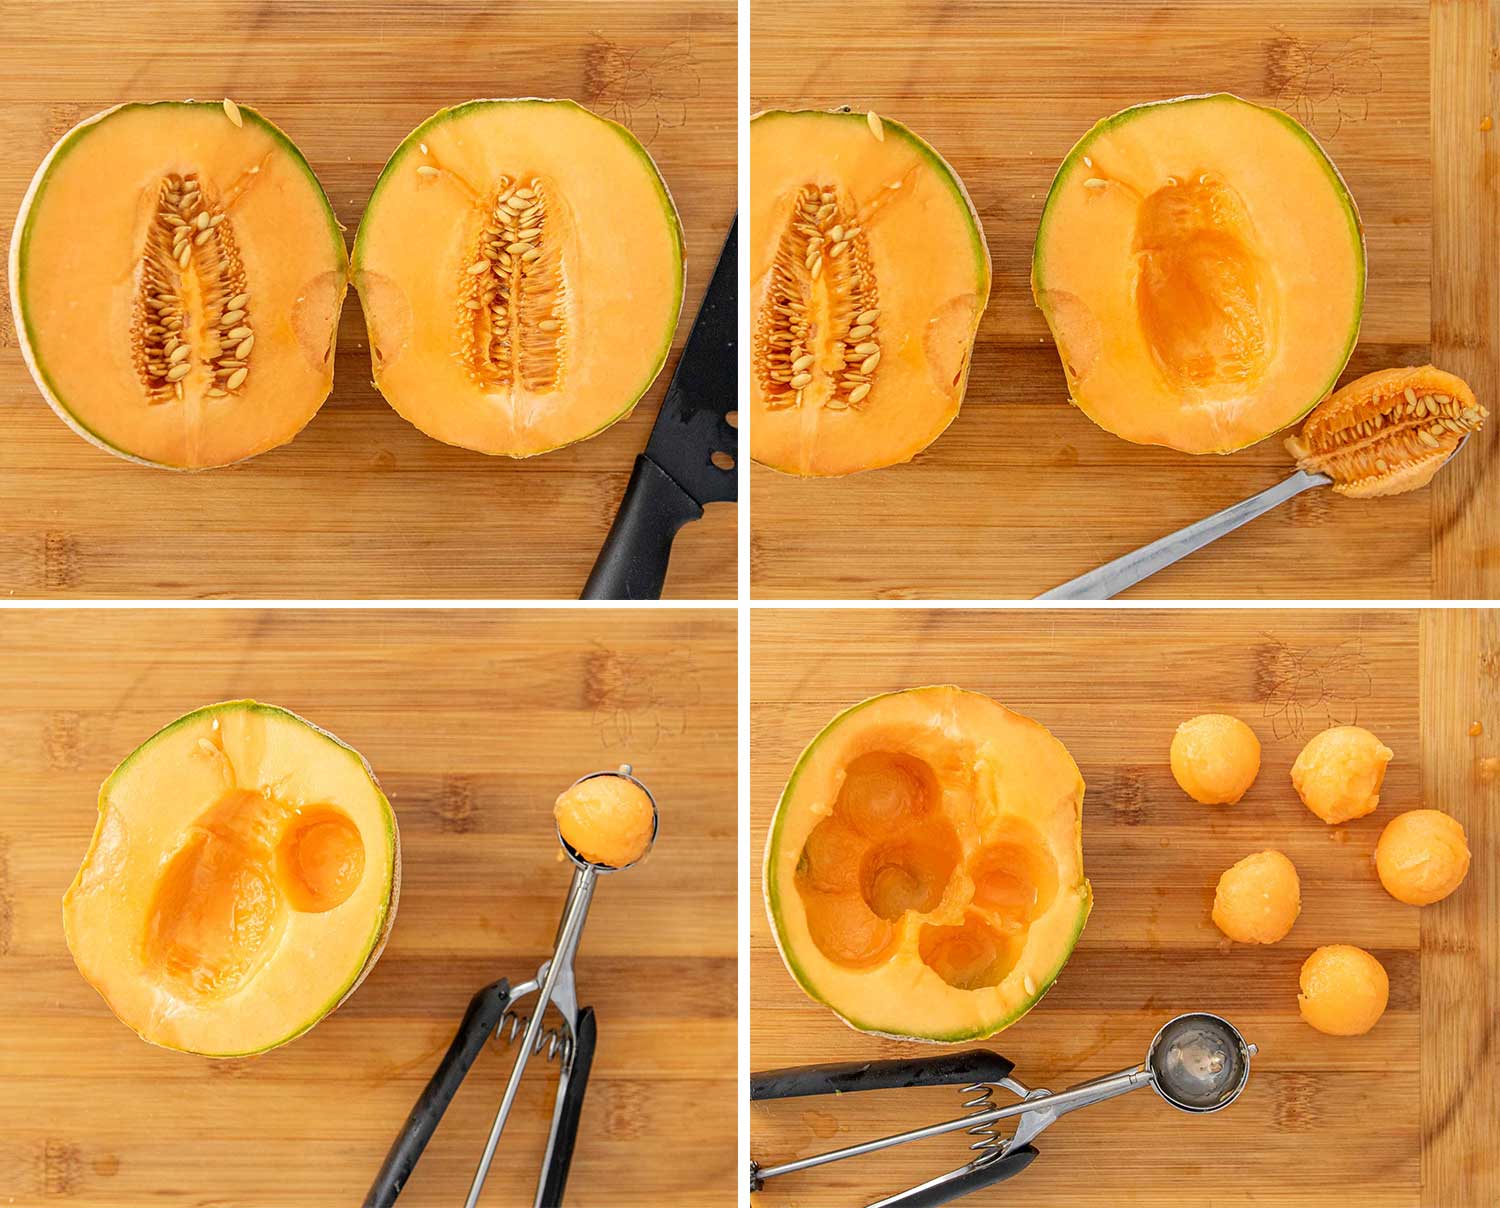 process shots showing how to make melon prosciutto skewers.